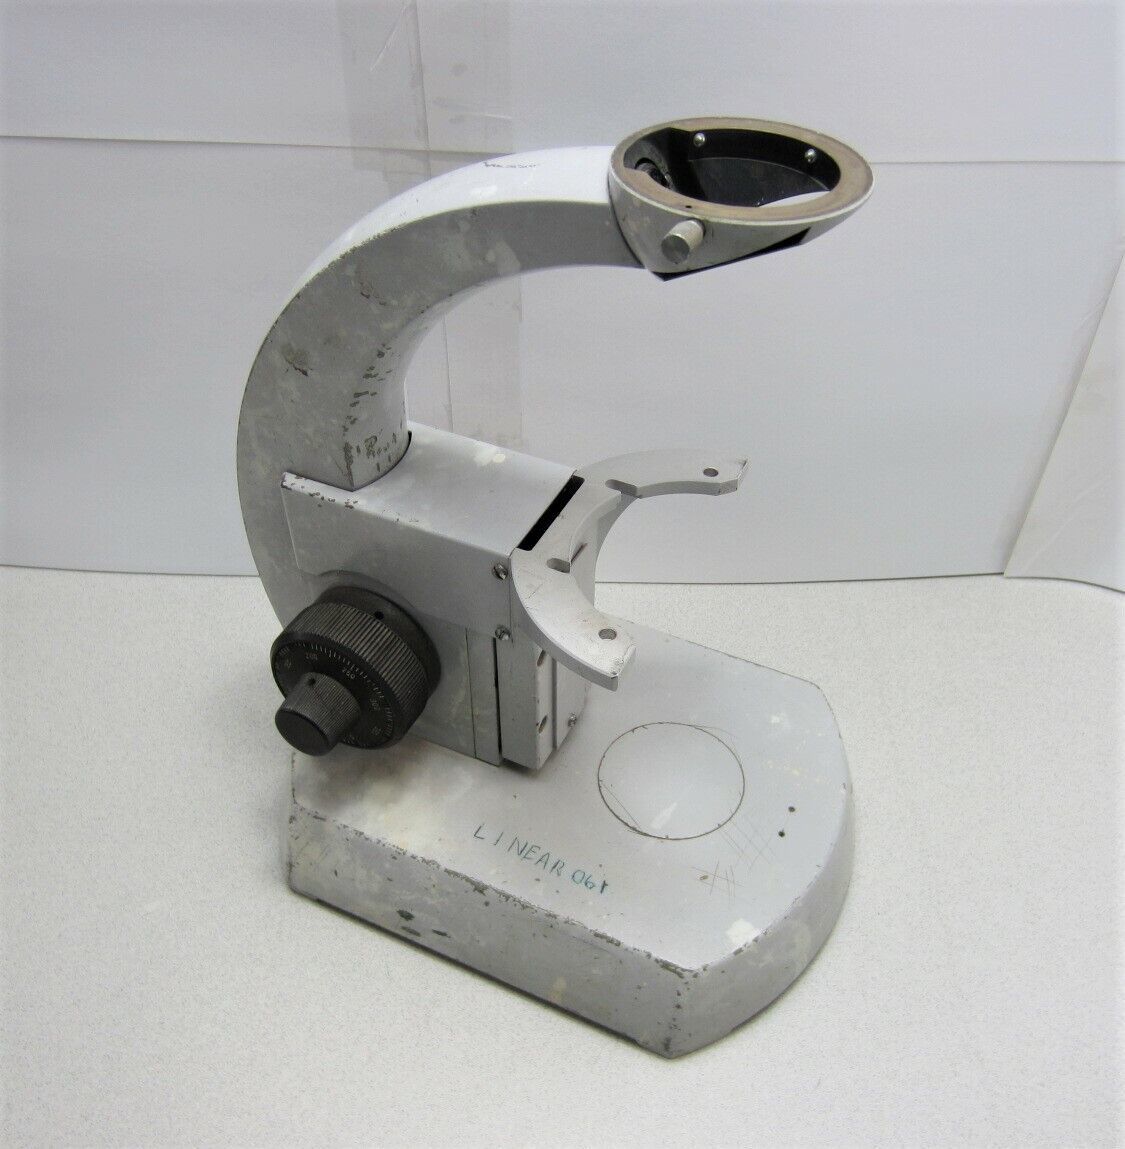 Zeiss Microscope Base Only without Optics, Stage, or Head - $27.92